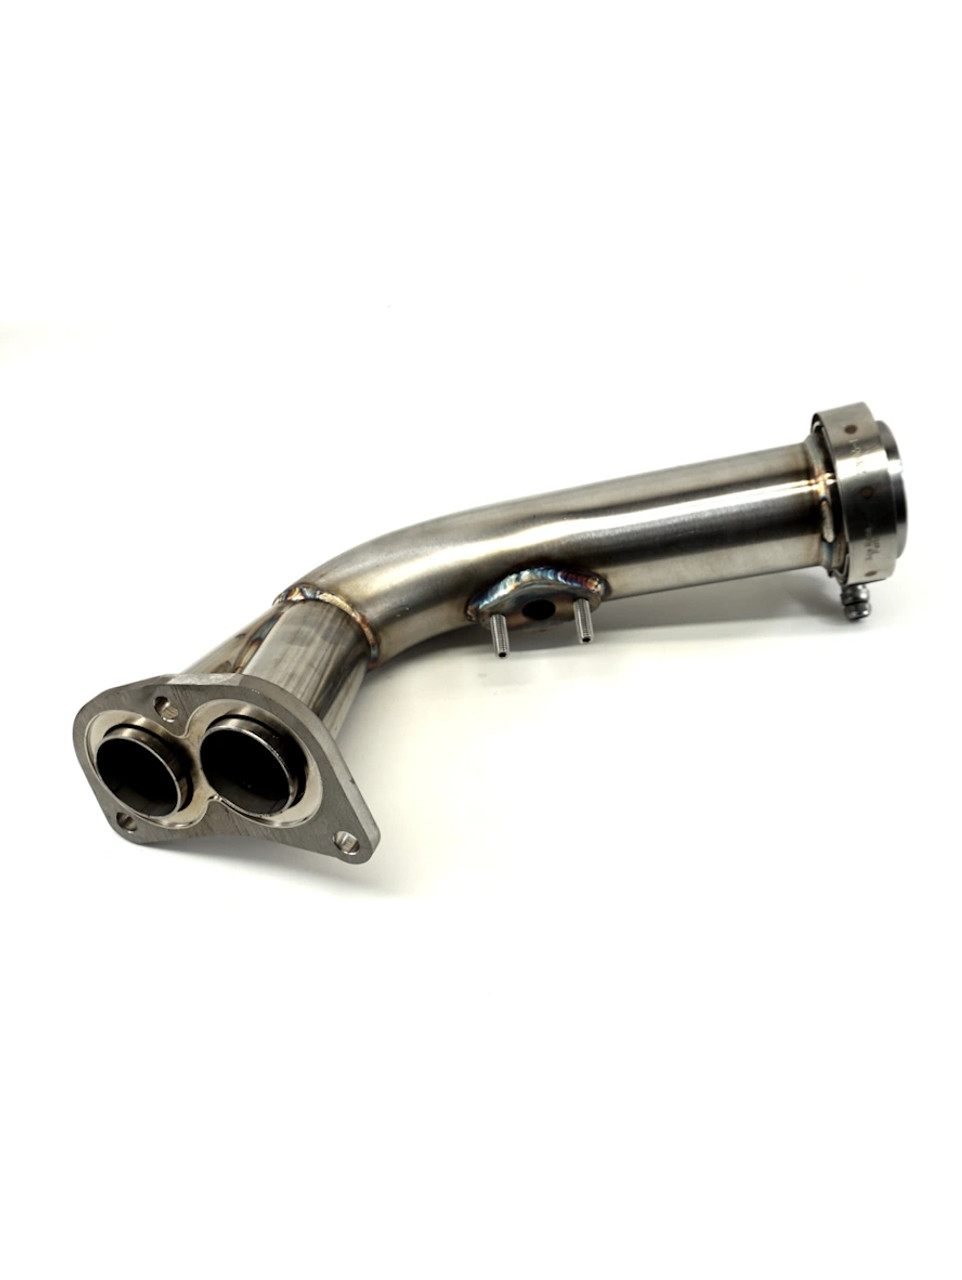 Exhaust Pipe- Toyota Tacoma, 4Runner & Swap V6 3.4L 5VZ S.S. Exhaust Down Pipe (1995-2001) 5vz Lower Pipe